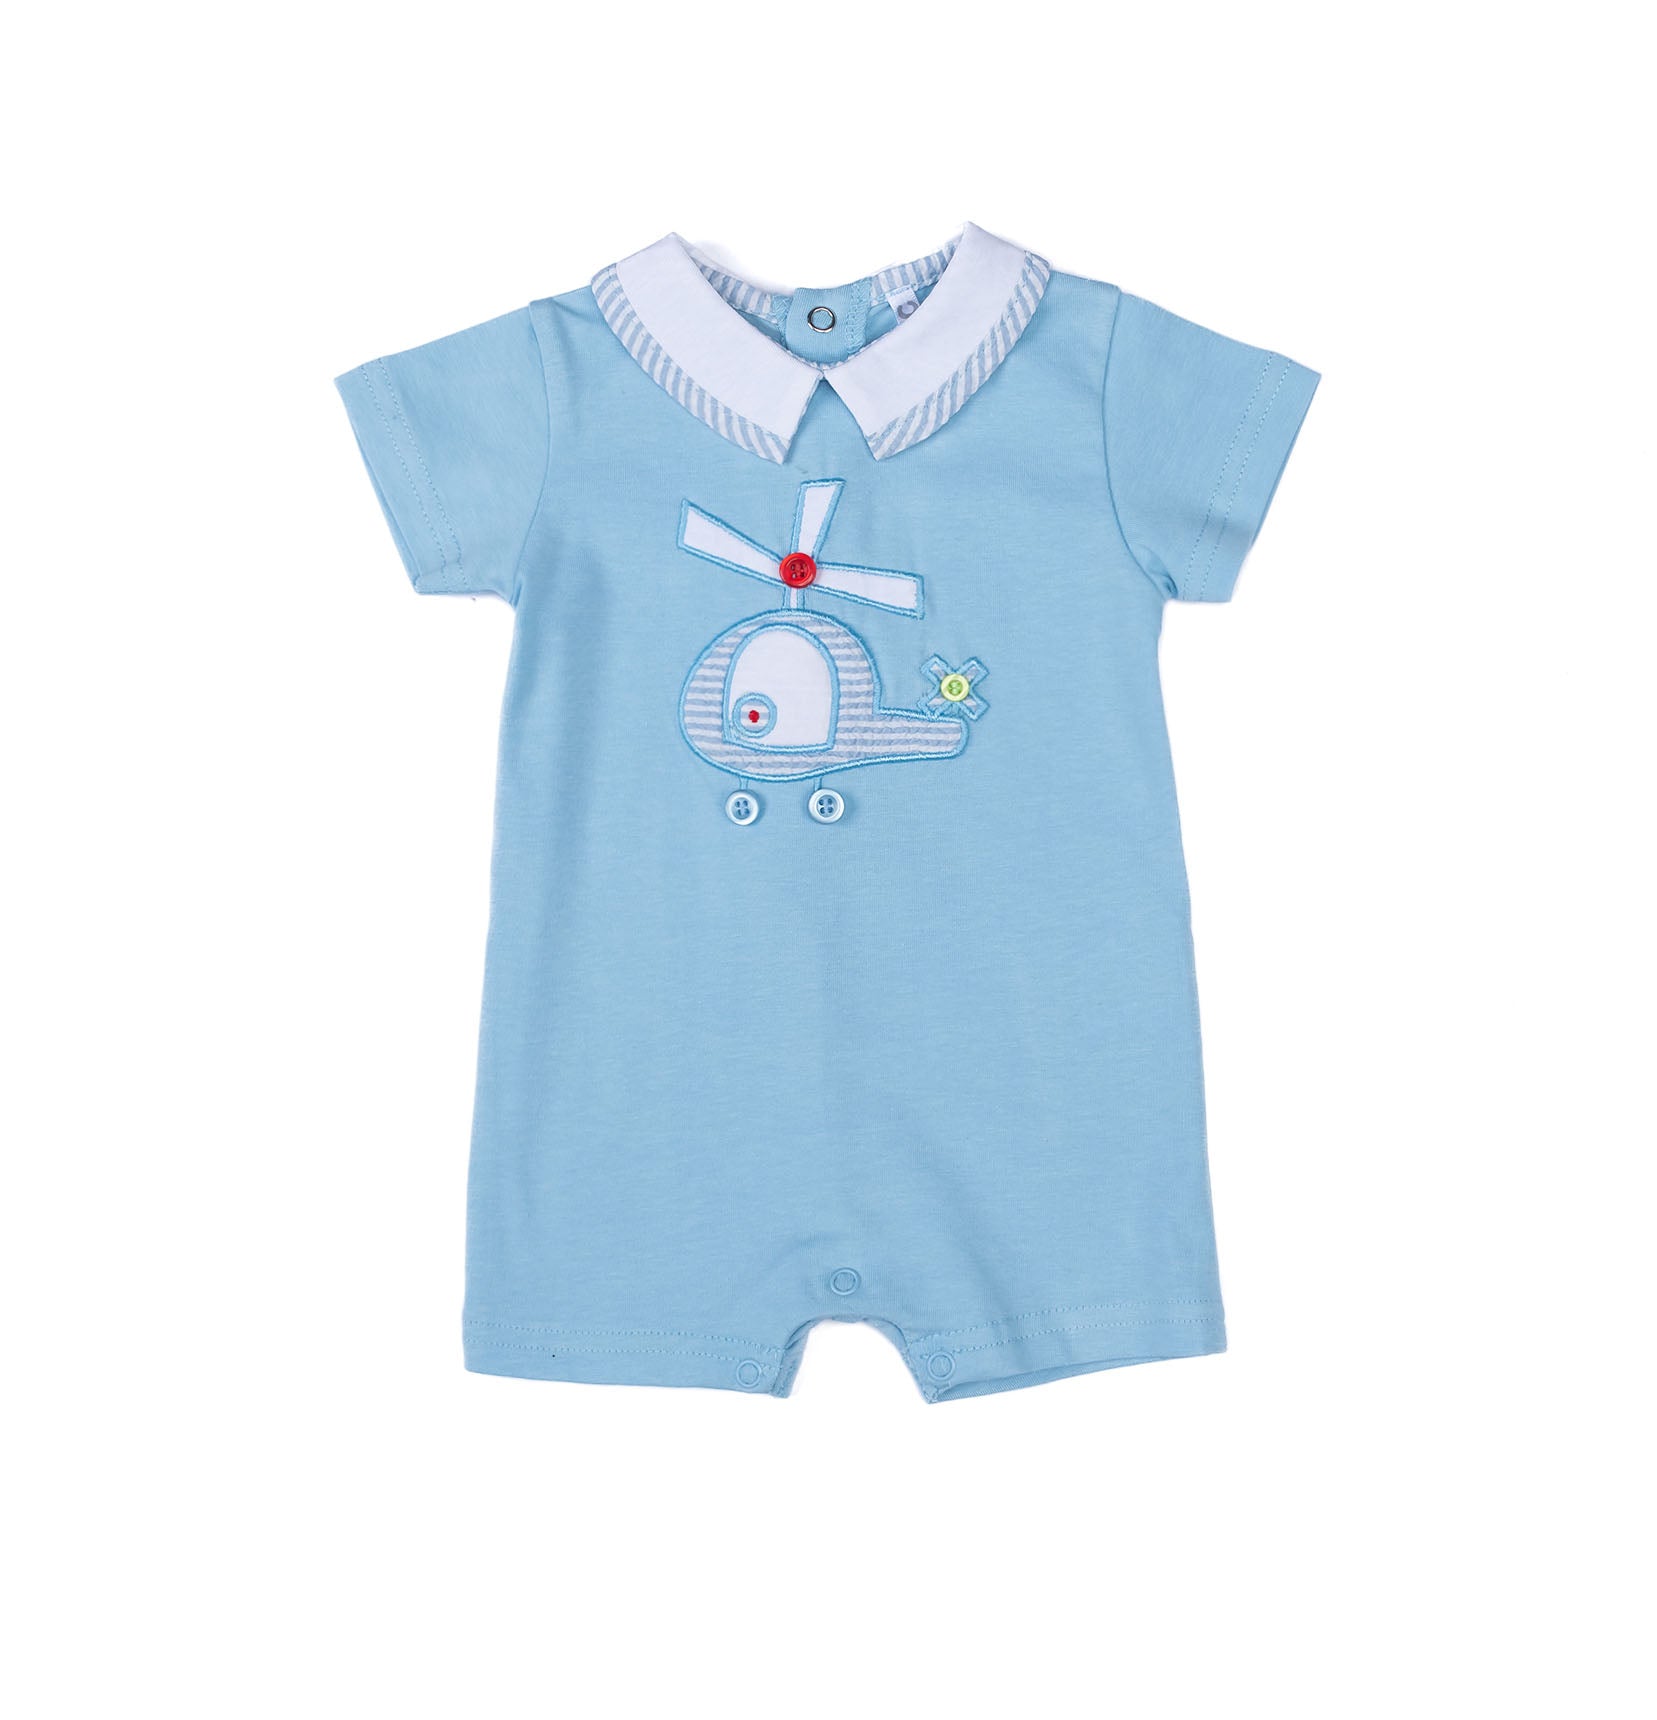 Airplane baby boy romper by Pompelo